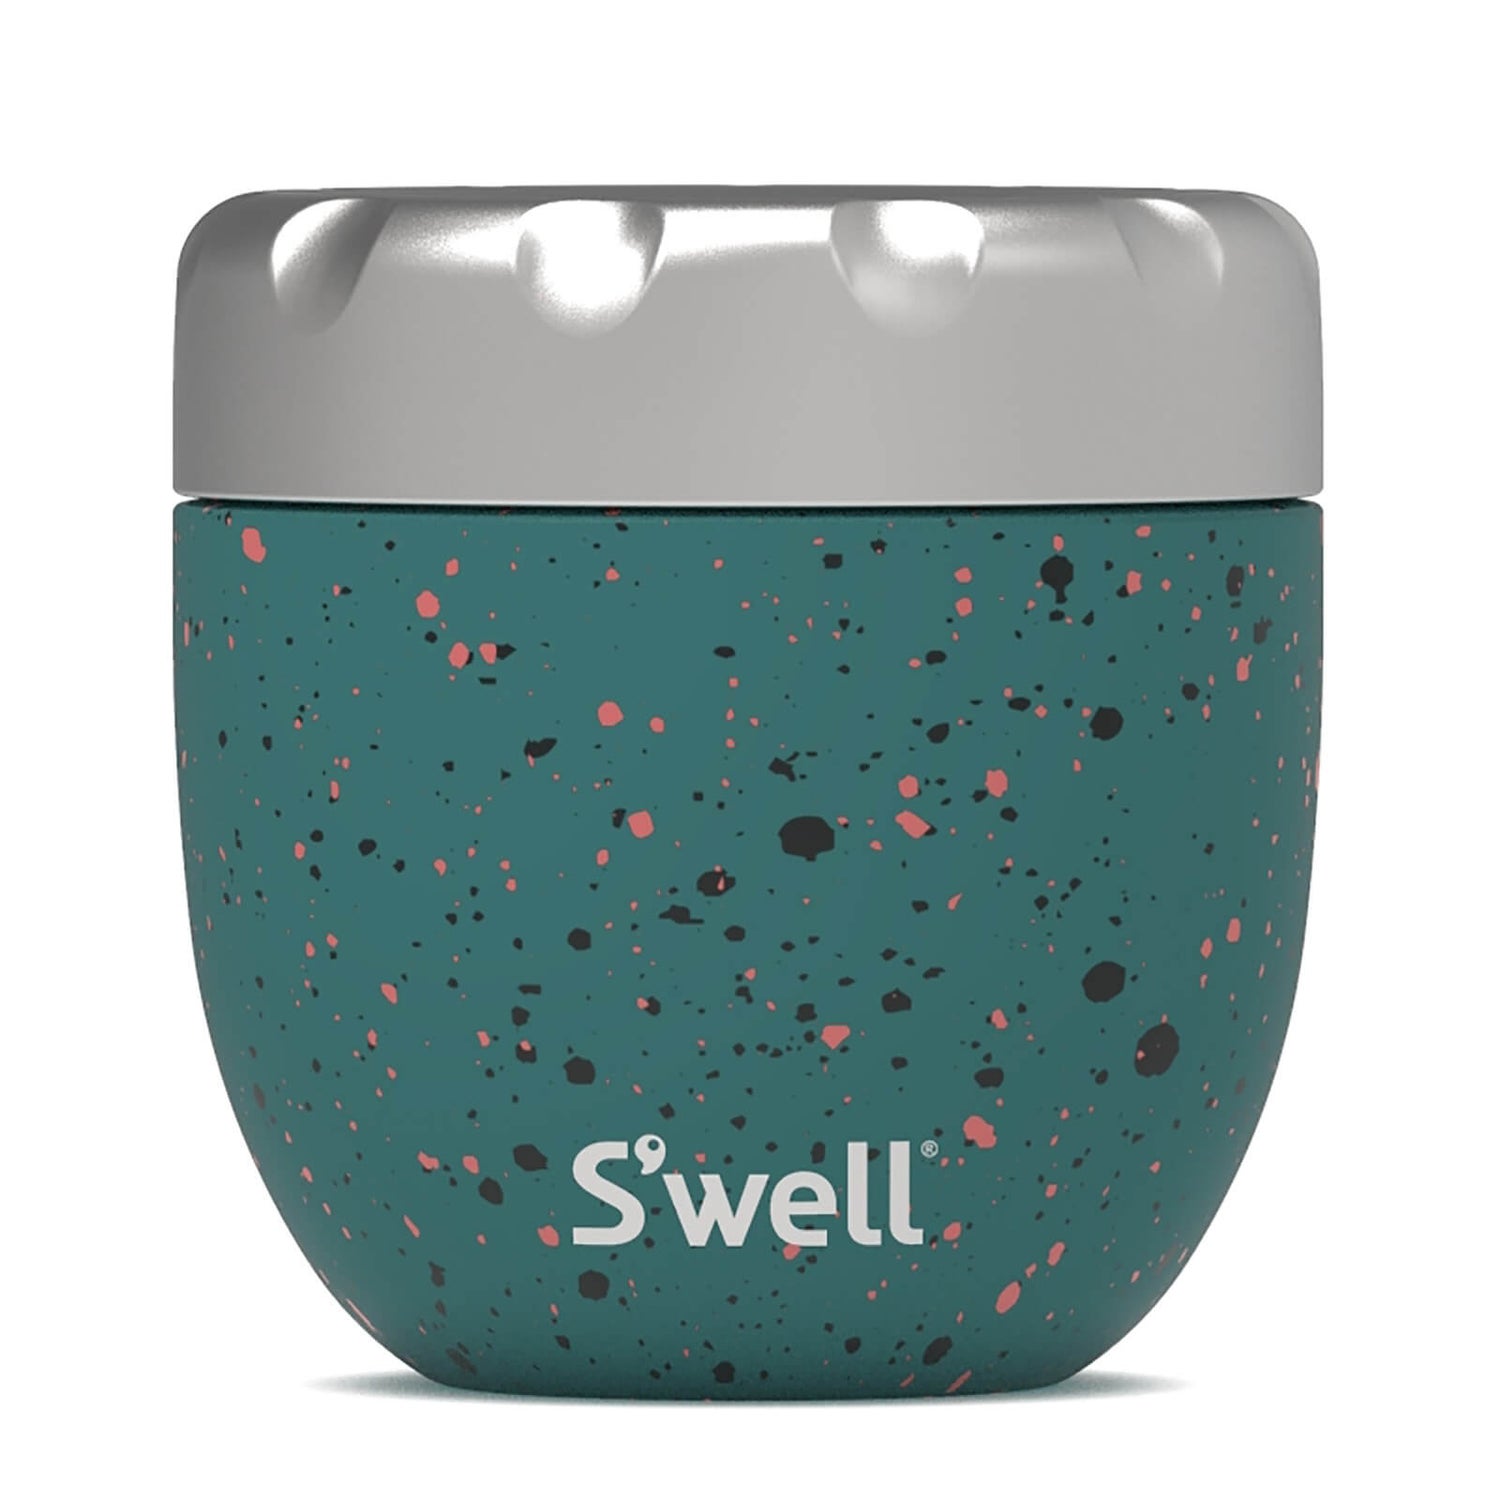 S'well Eats 2 in 1 Speckled Earth Nesting Food Bowl - Small